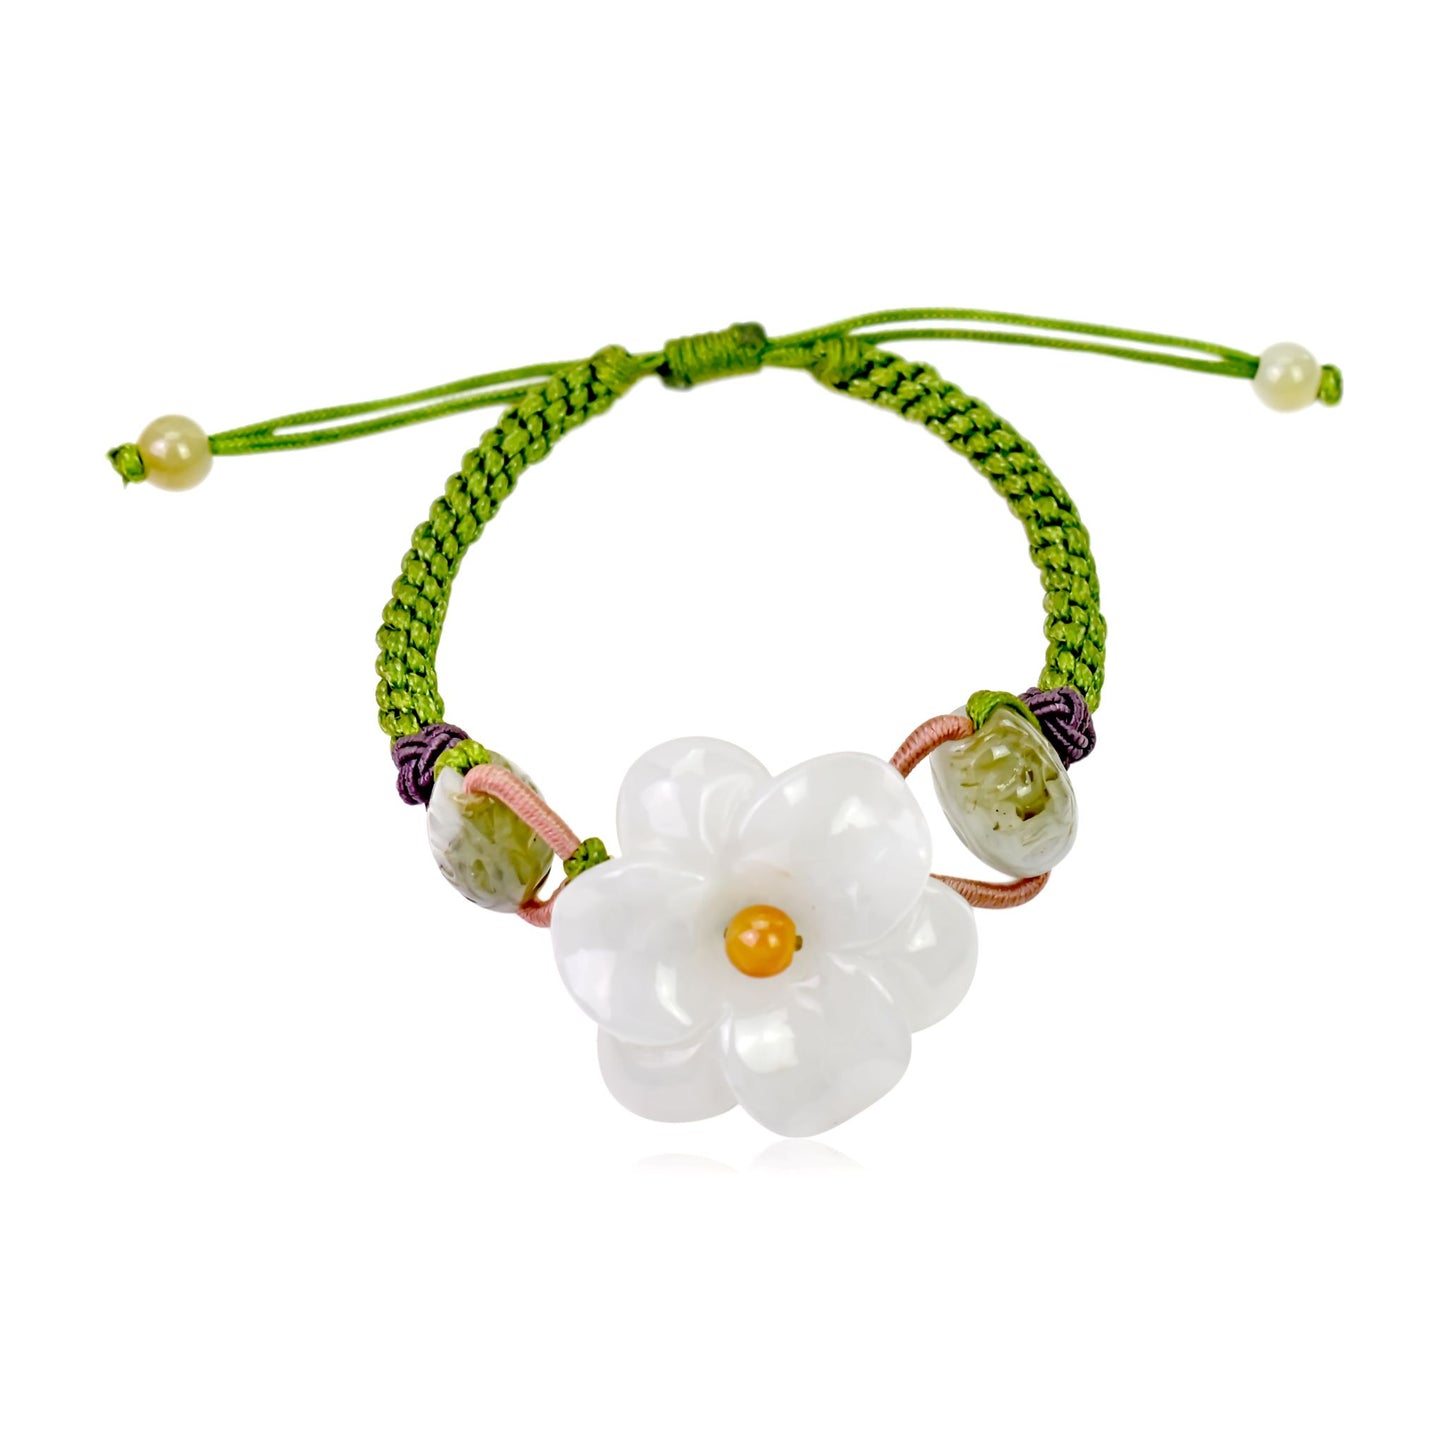 Show Off Your Unique Style with the Amaryllis Jade Bracelet made with Lime Cord